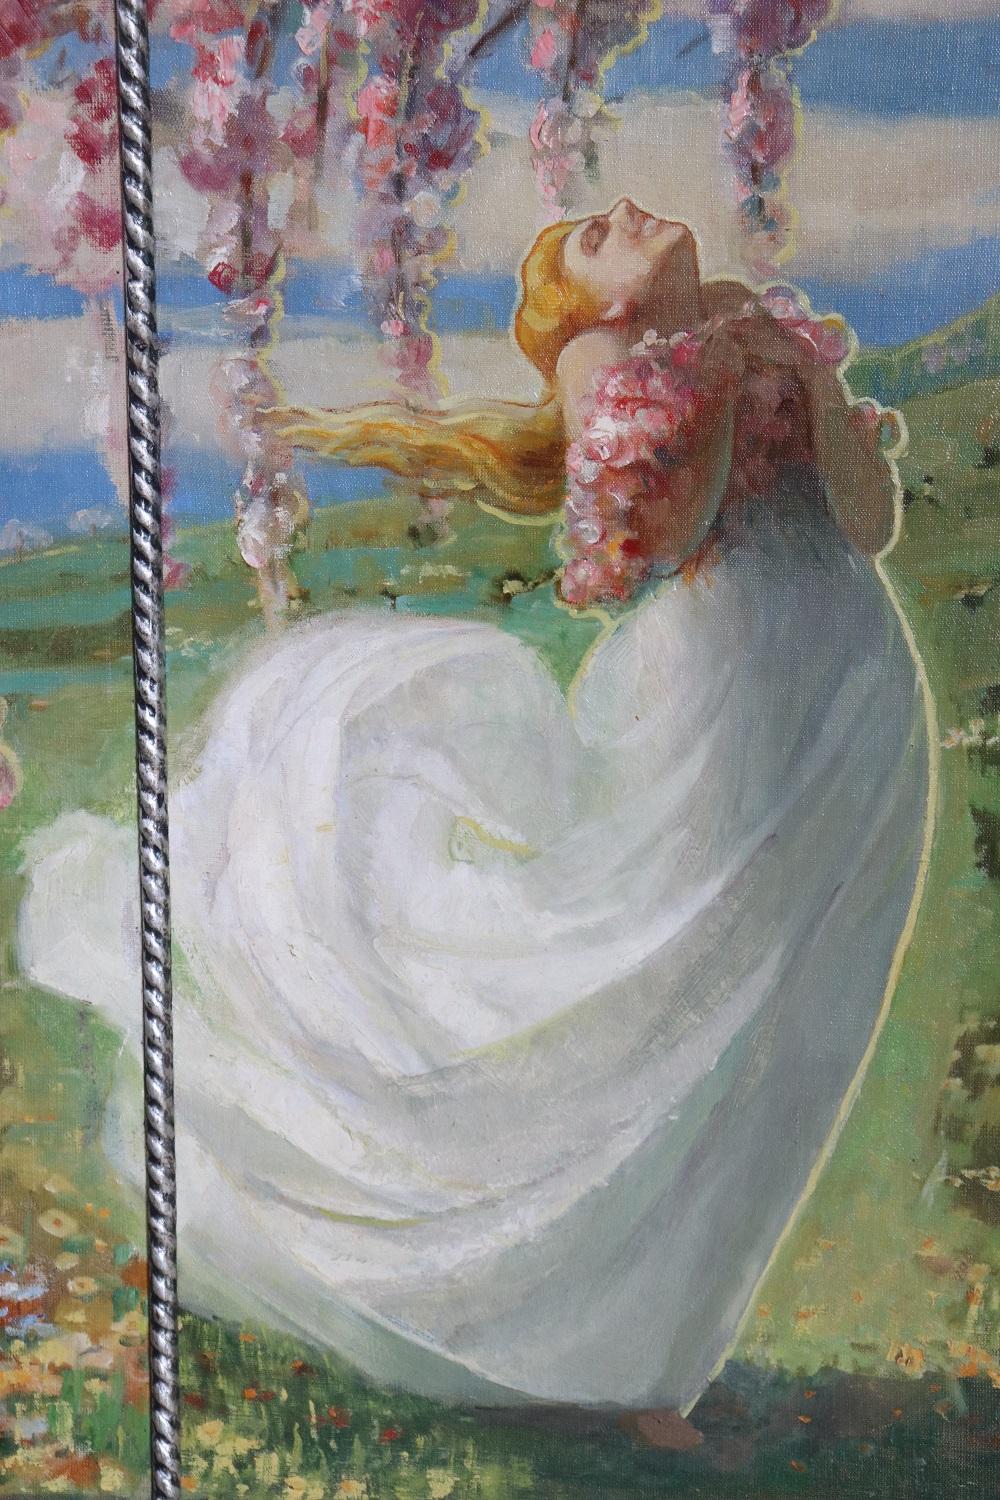 Beautiful oil painting on canvas dated 1927s. A girl in a white dress with flowers, the image is art nouveau inspired with a high quality impressionist style painting technique. Sold with wooden frame. The painting is signed but the artist is not